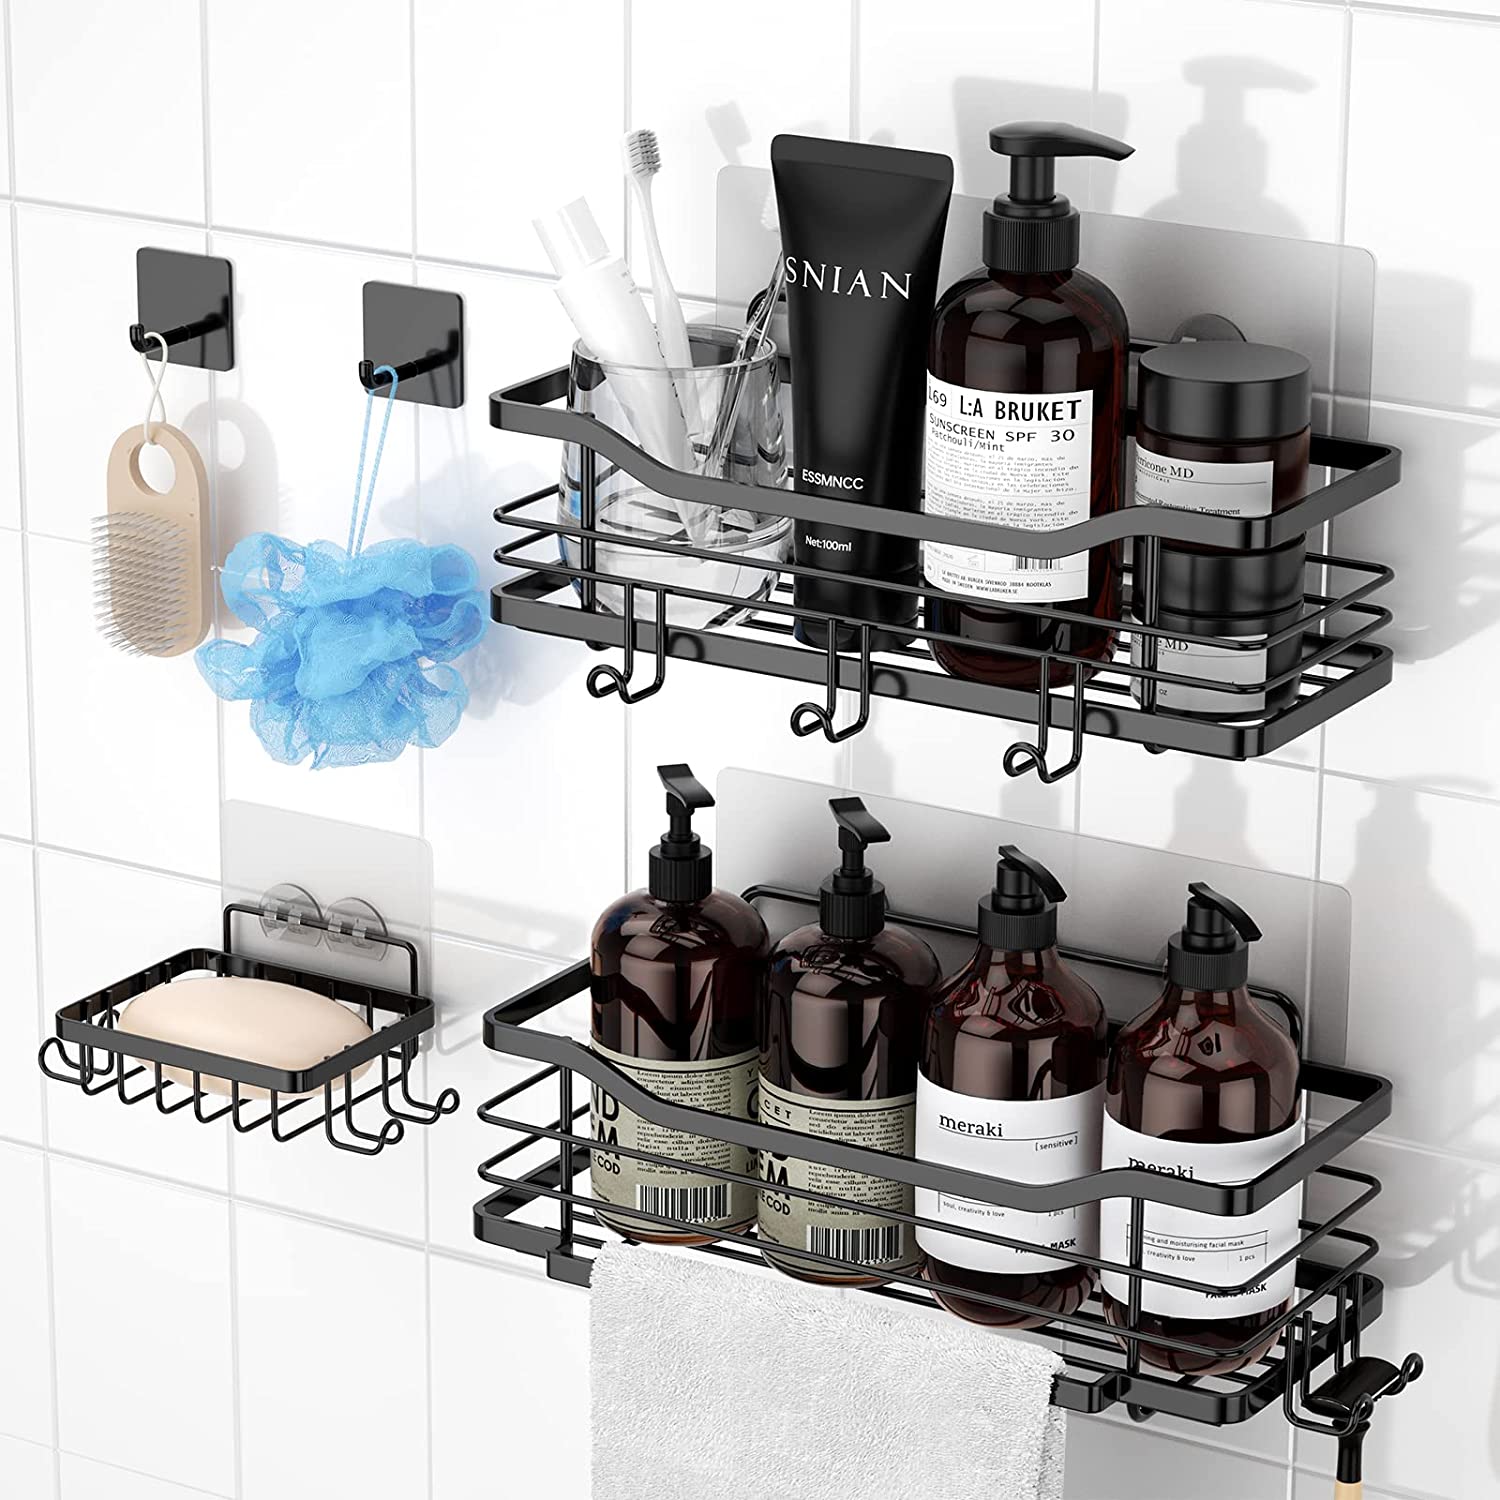 5-Pack Shower Shelf, Adhesive Shower Organizer No Drilling with